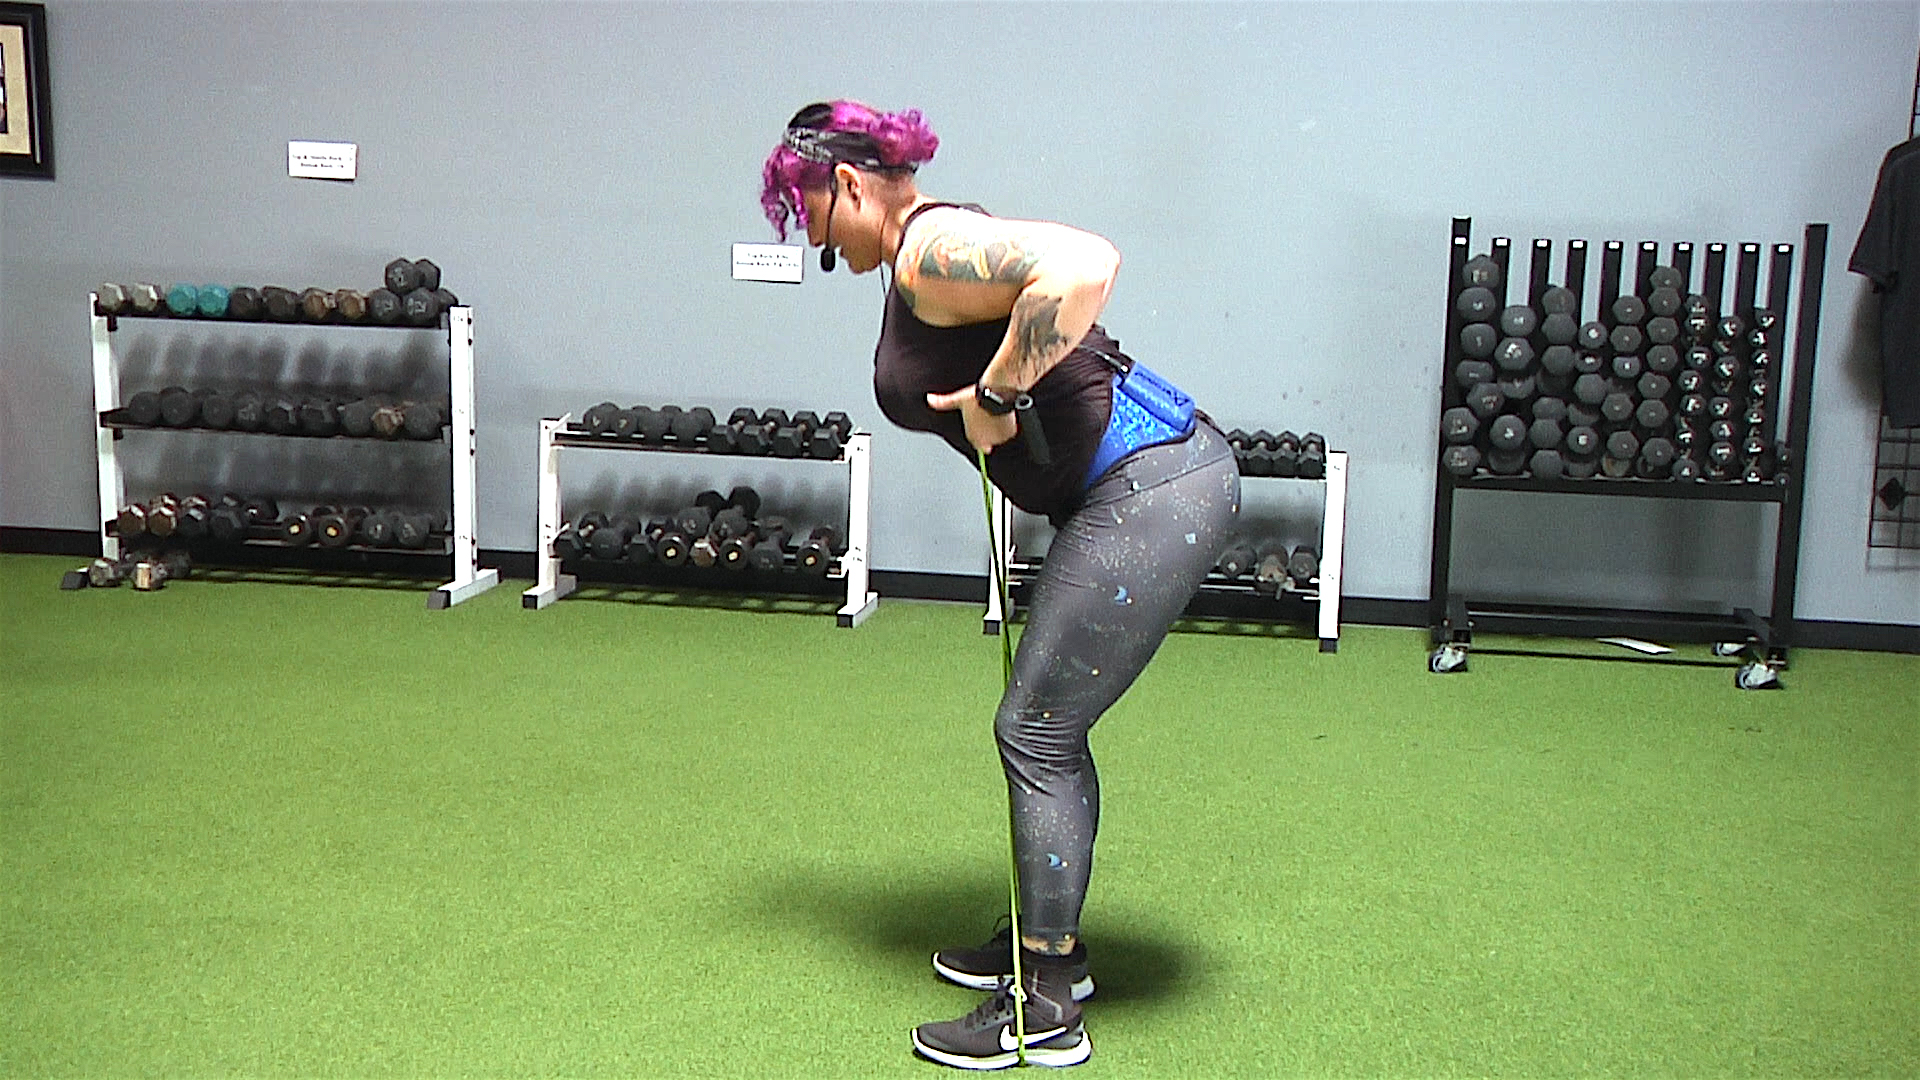 Resist Quitting. A Full Body Resistance Band Workout Online!